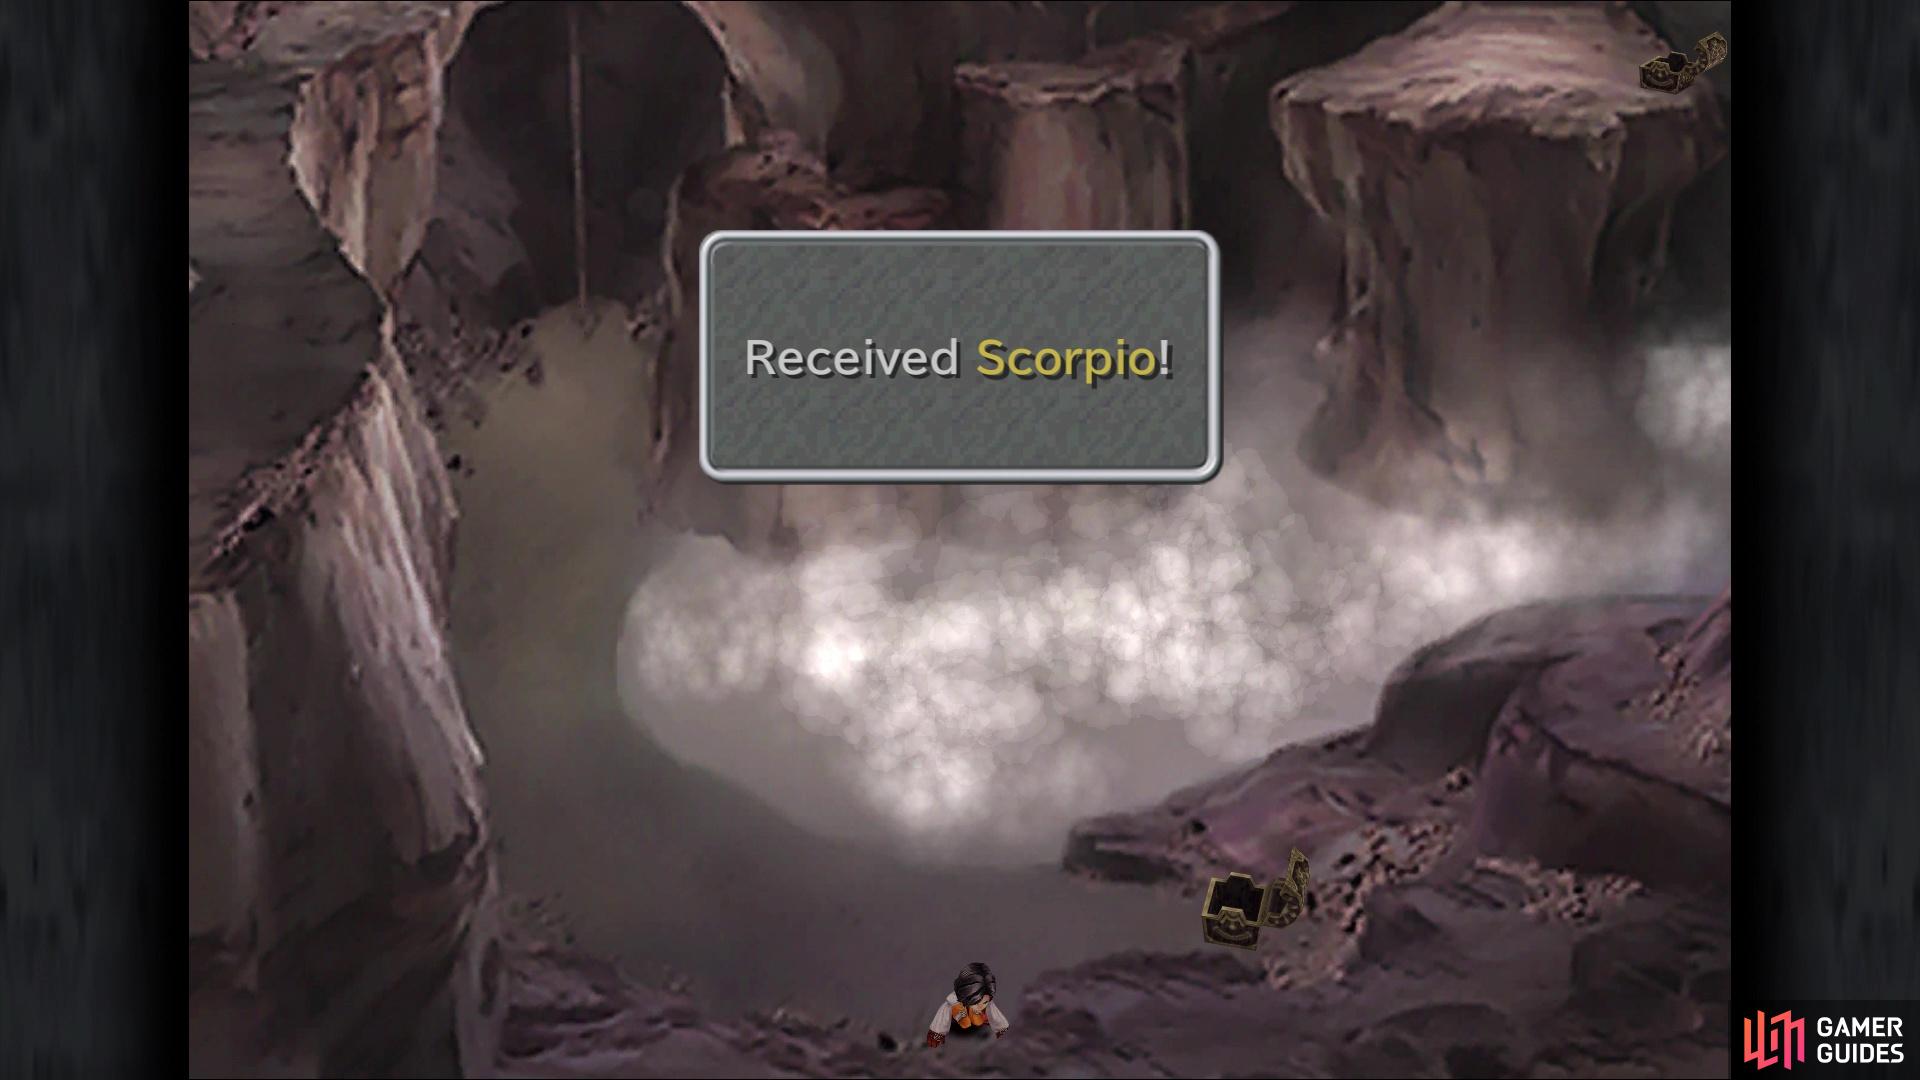 You can find the Scorpio coin at the bottom of the first screen in Quan’s Dwelling